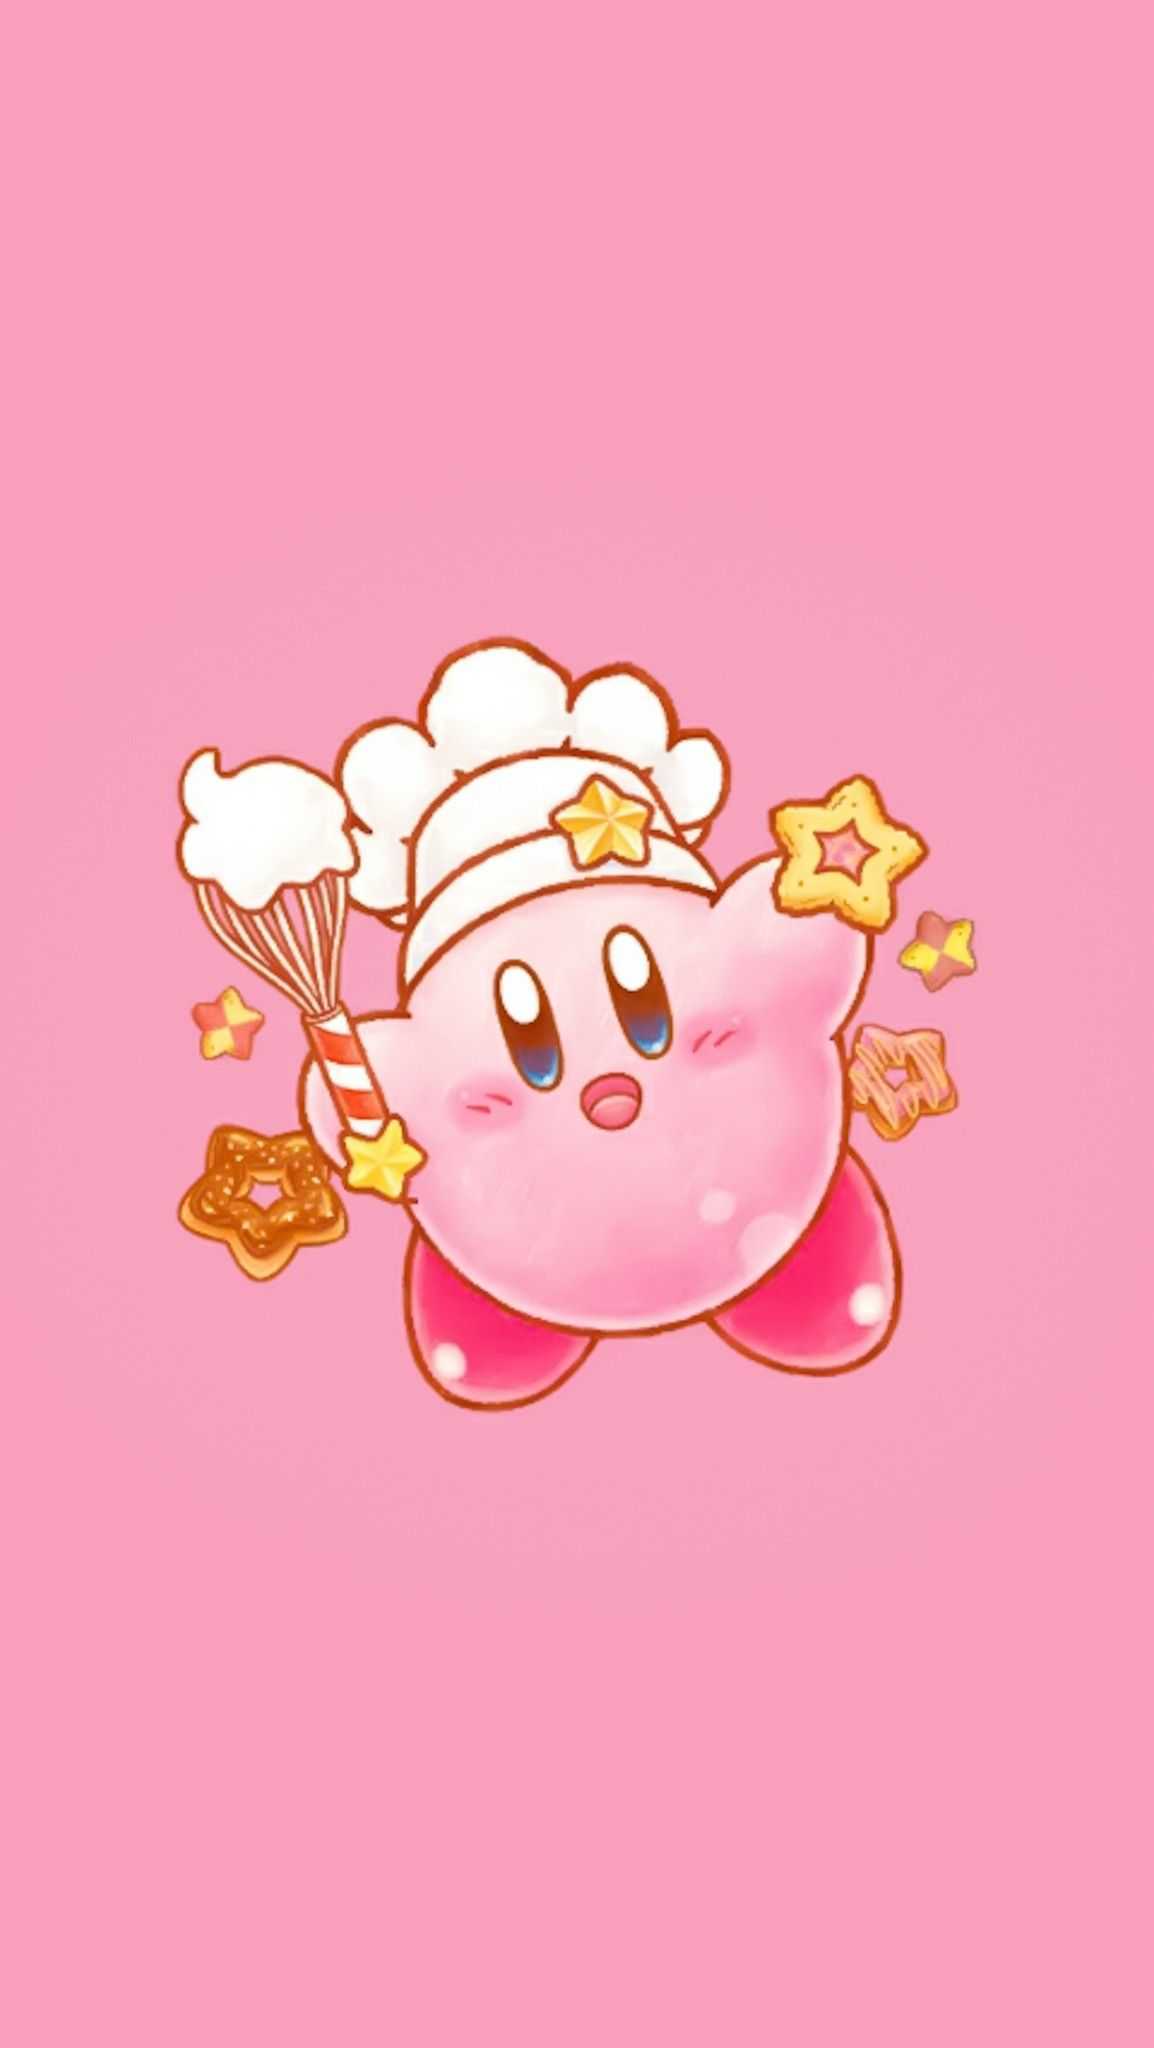 My Nintendo Now Offering Kirby And The Forgotten Land Wallpaper Sets –  NintendoSoup